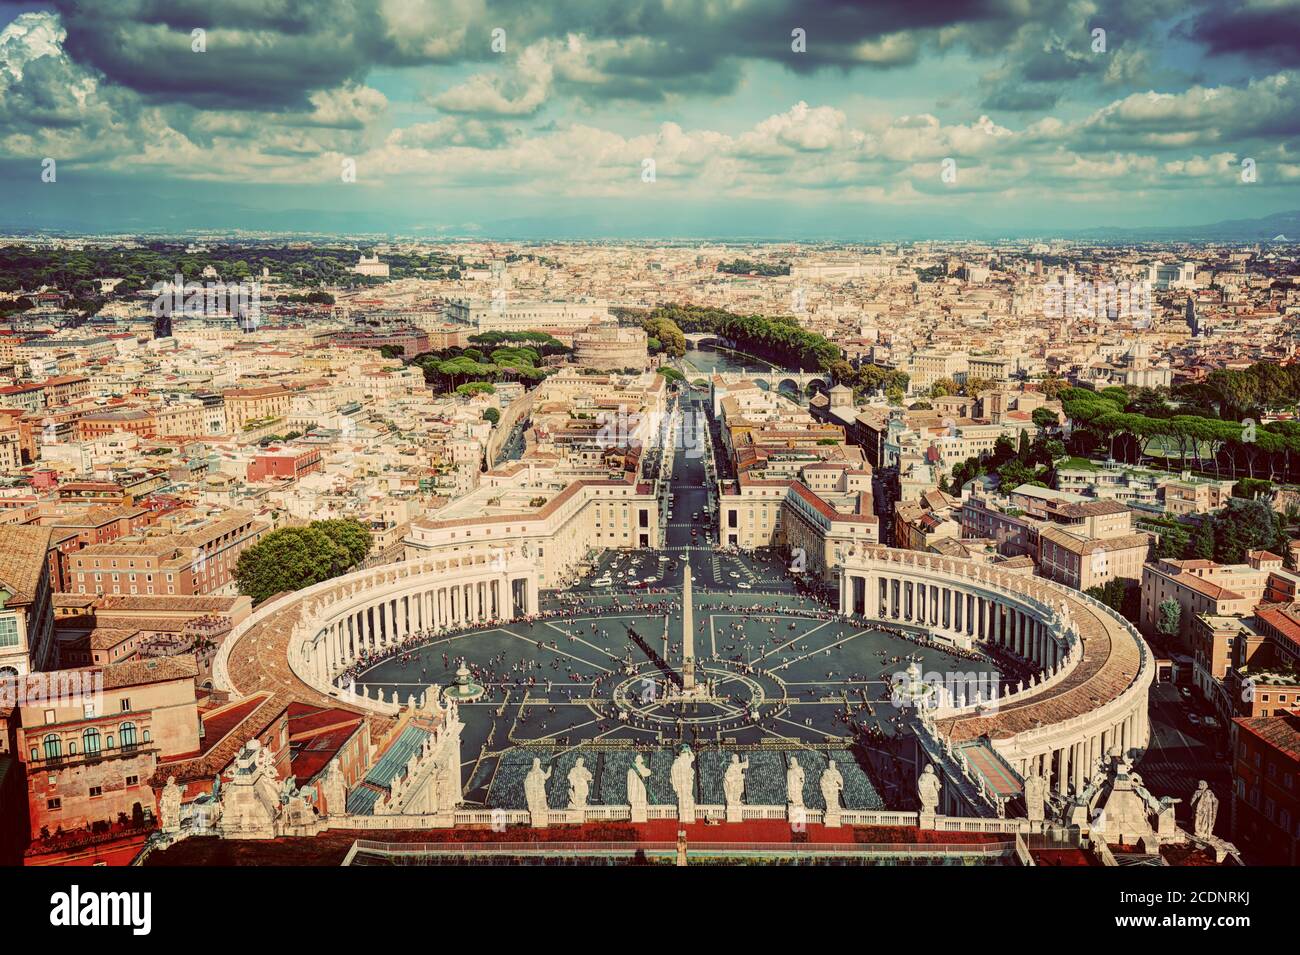 St. Peter#39;s Square, Piazza San Pietro in Vatican City. Rome, Italy in the background Stock Photo